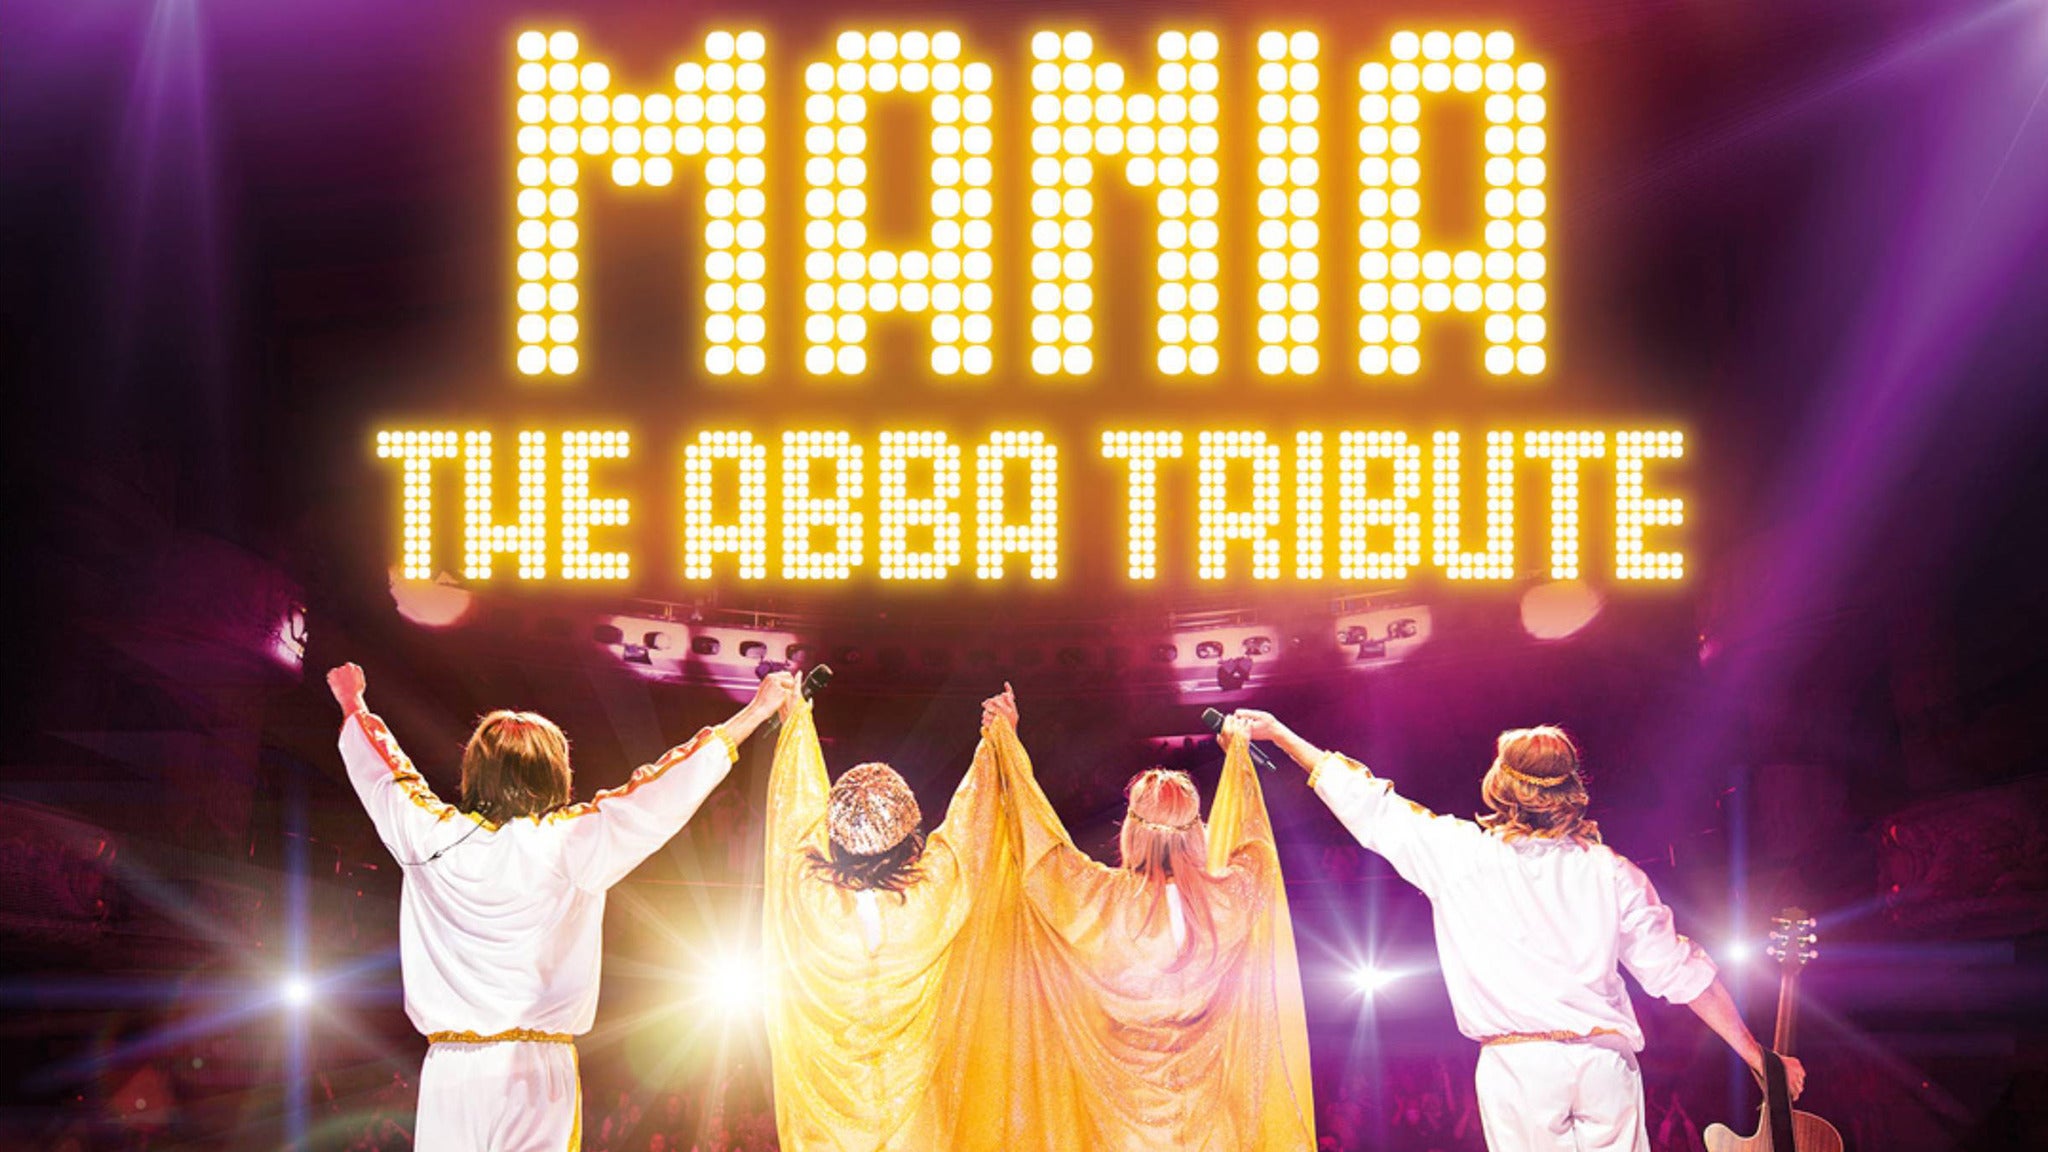 MANIA: The ABBA Tribute presale code for real tickets in Denver